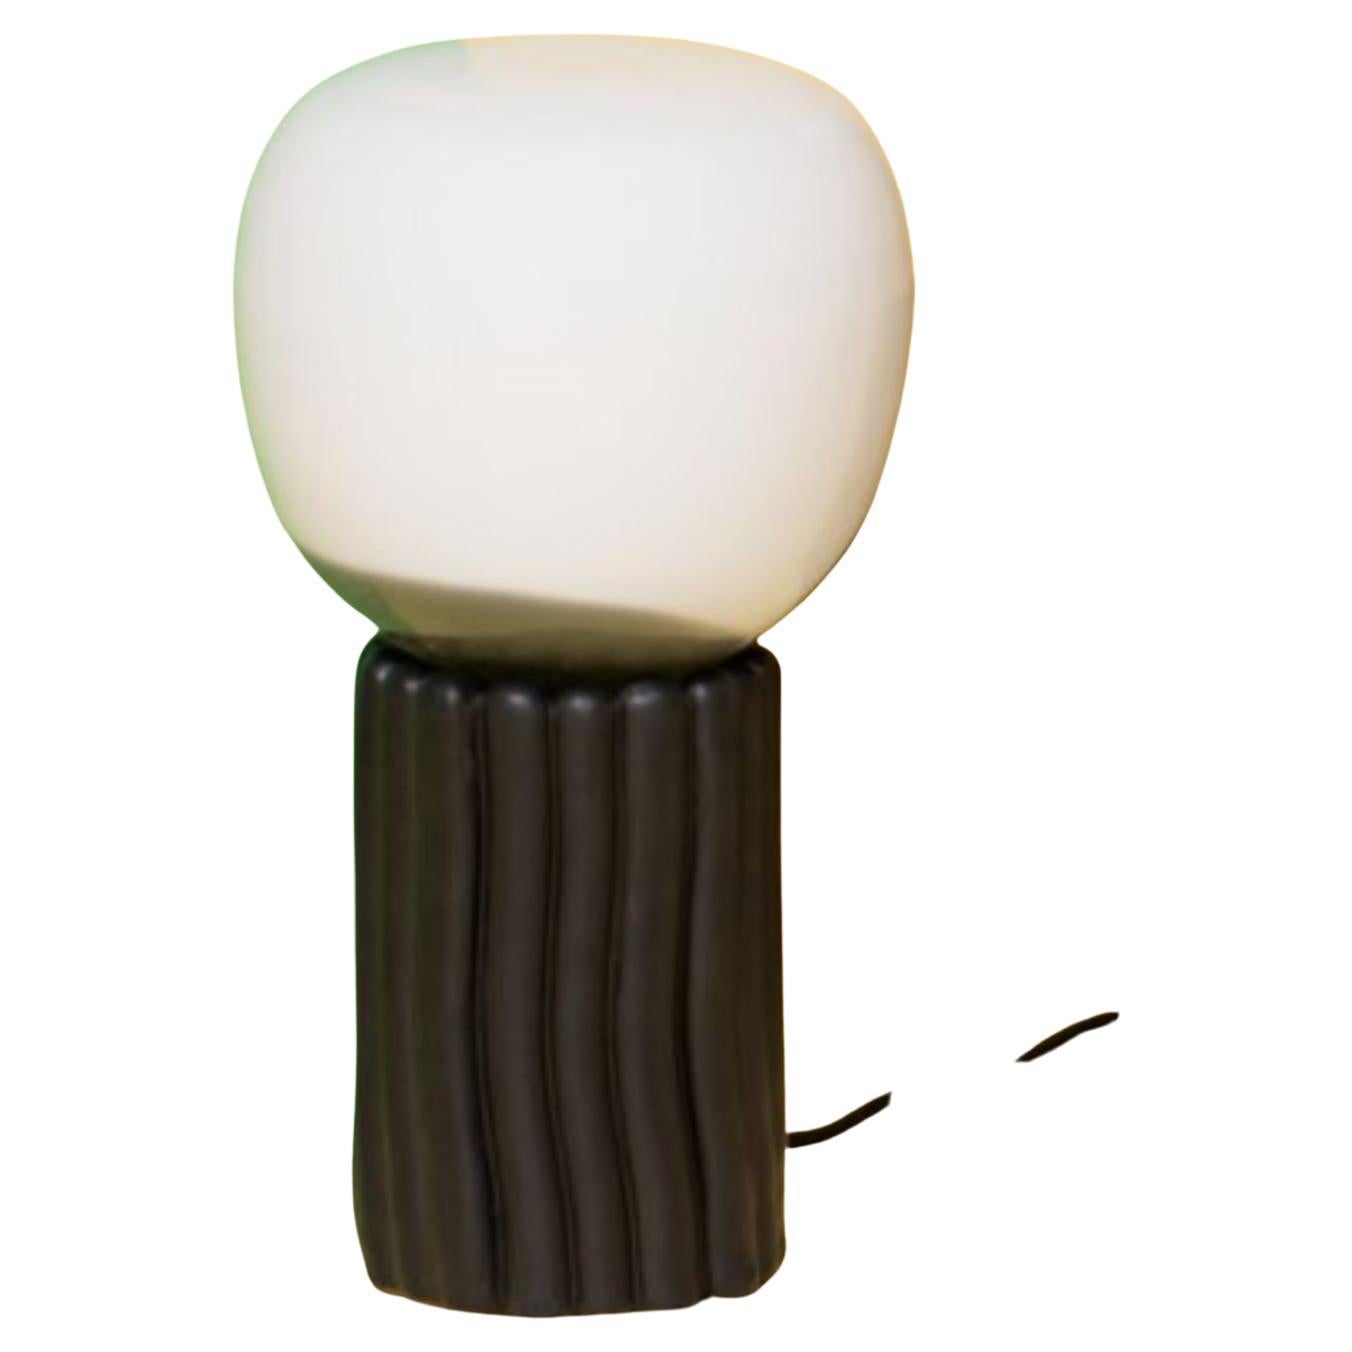 Tiki Lamp by Tero Kuitunen For Sale at 1stDibs